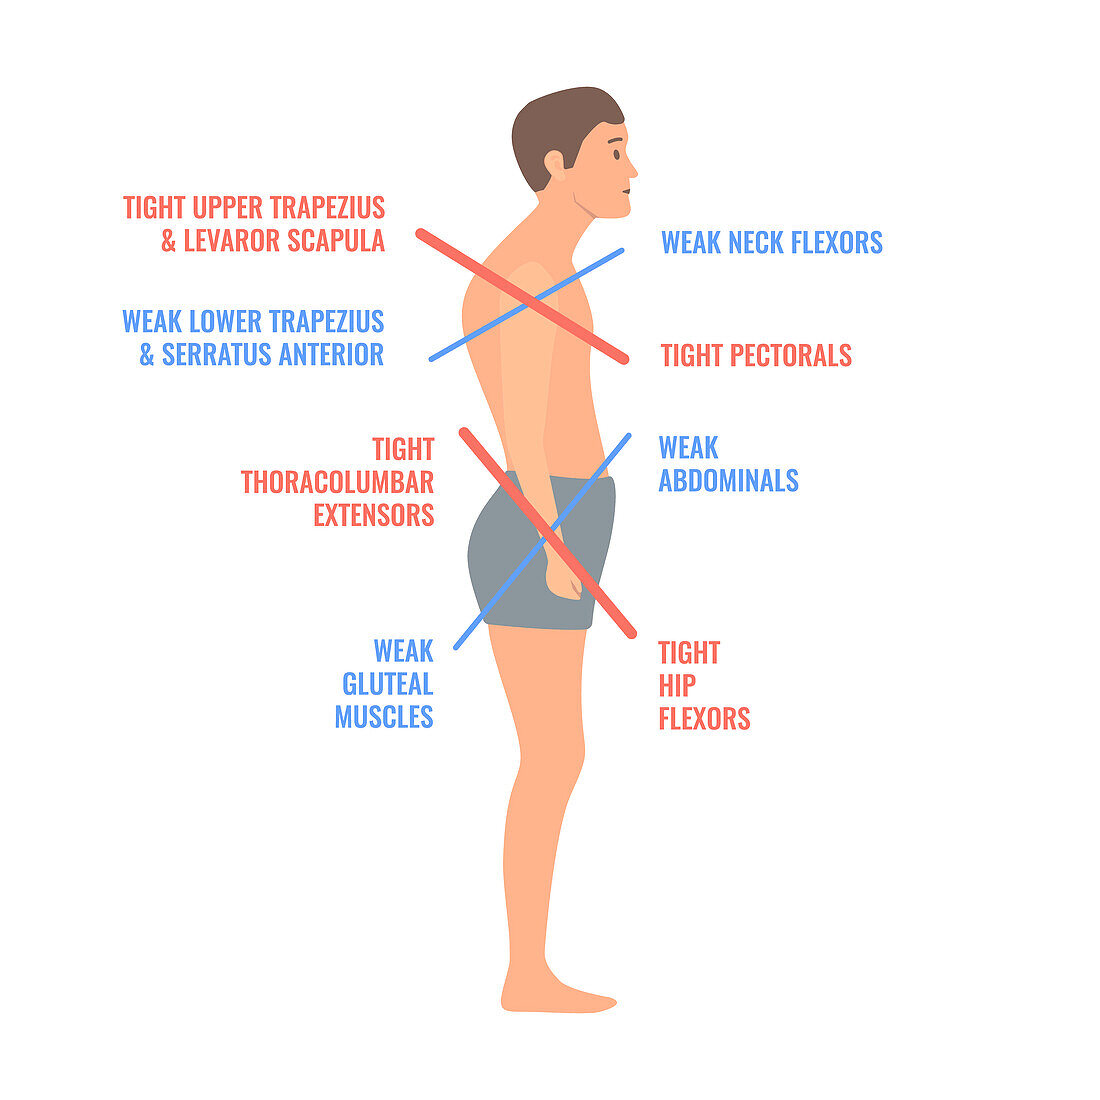 Upper and lower crossed syndromes, conceptual illustration